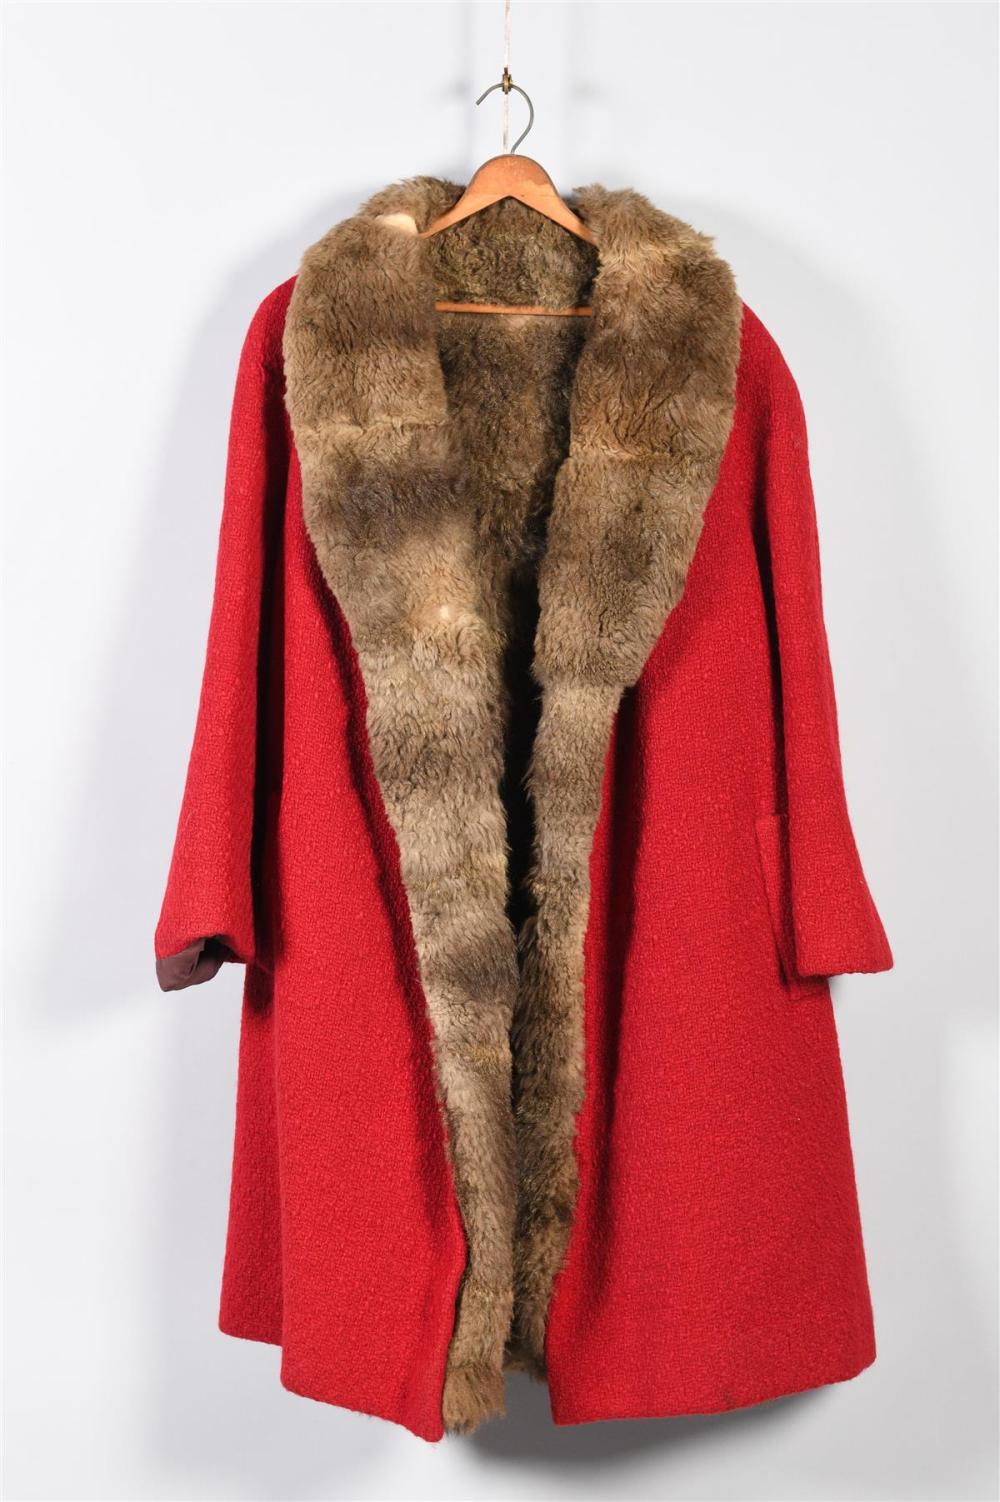 RED WOOL COAT WITH SHEEPSKIN LININGRED 33c25c